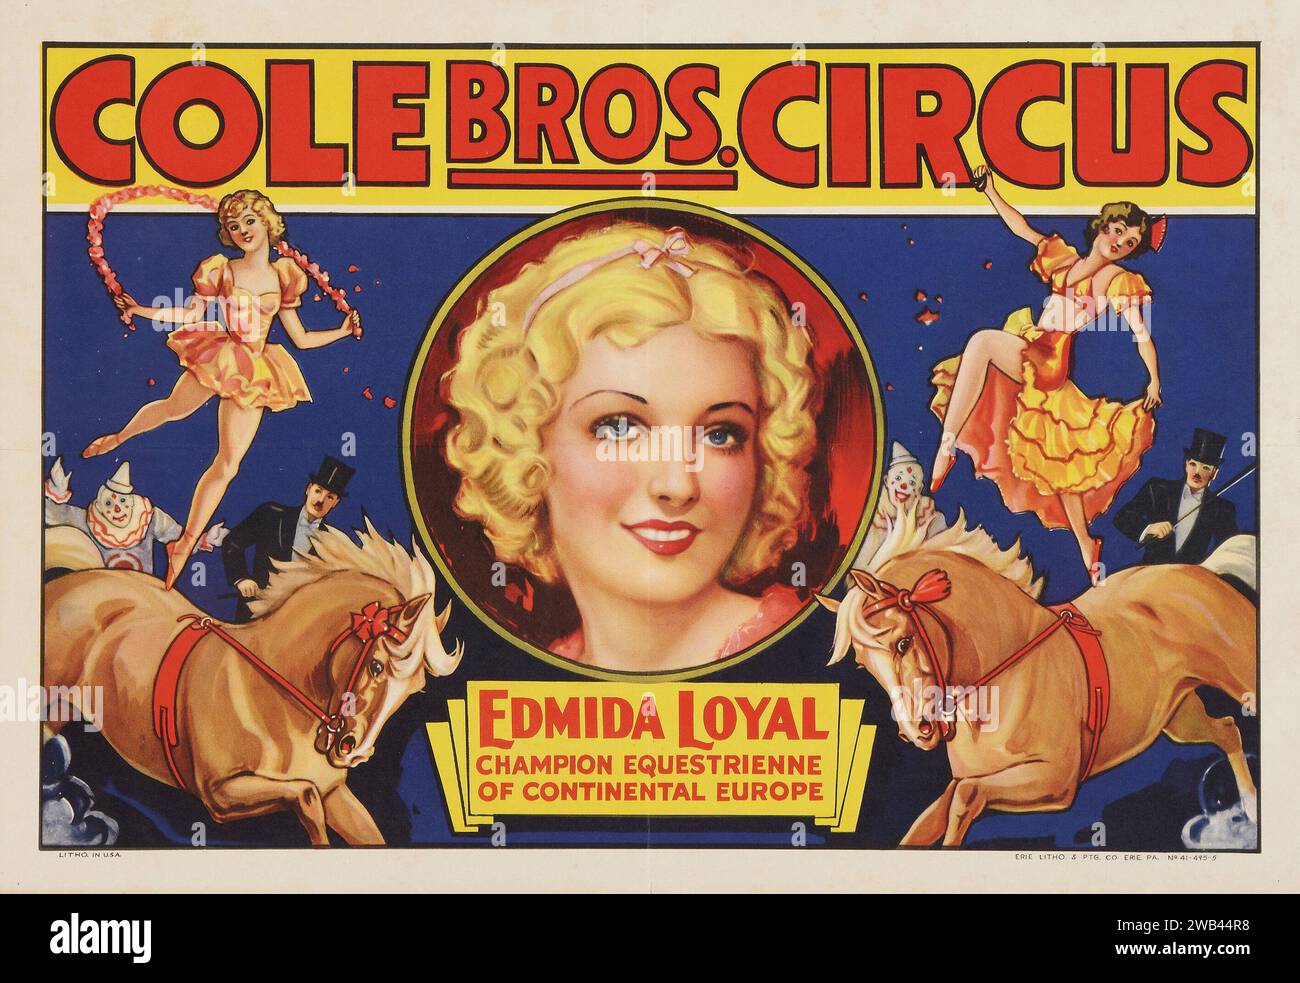 Emida Loyal, Champion Equestrienne - Circus Poster (Cole Brothers, Late 1930s) Stock Photo